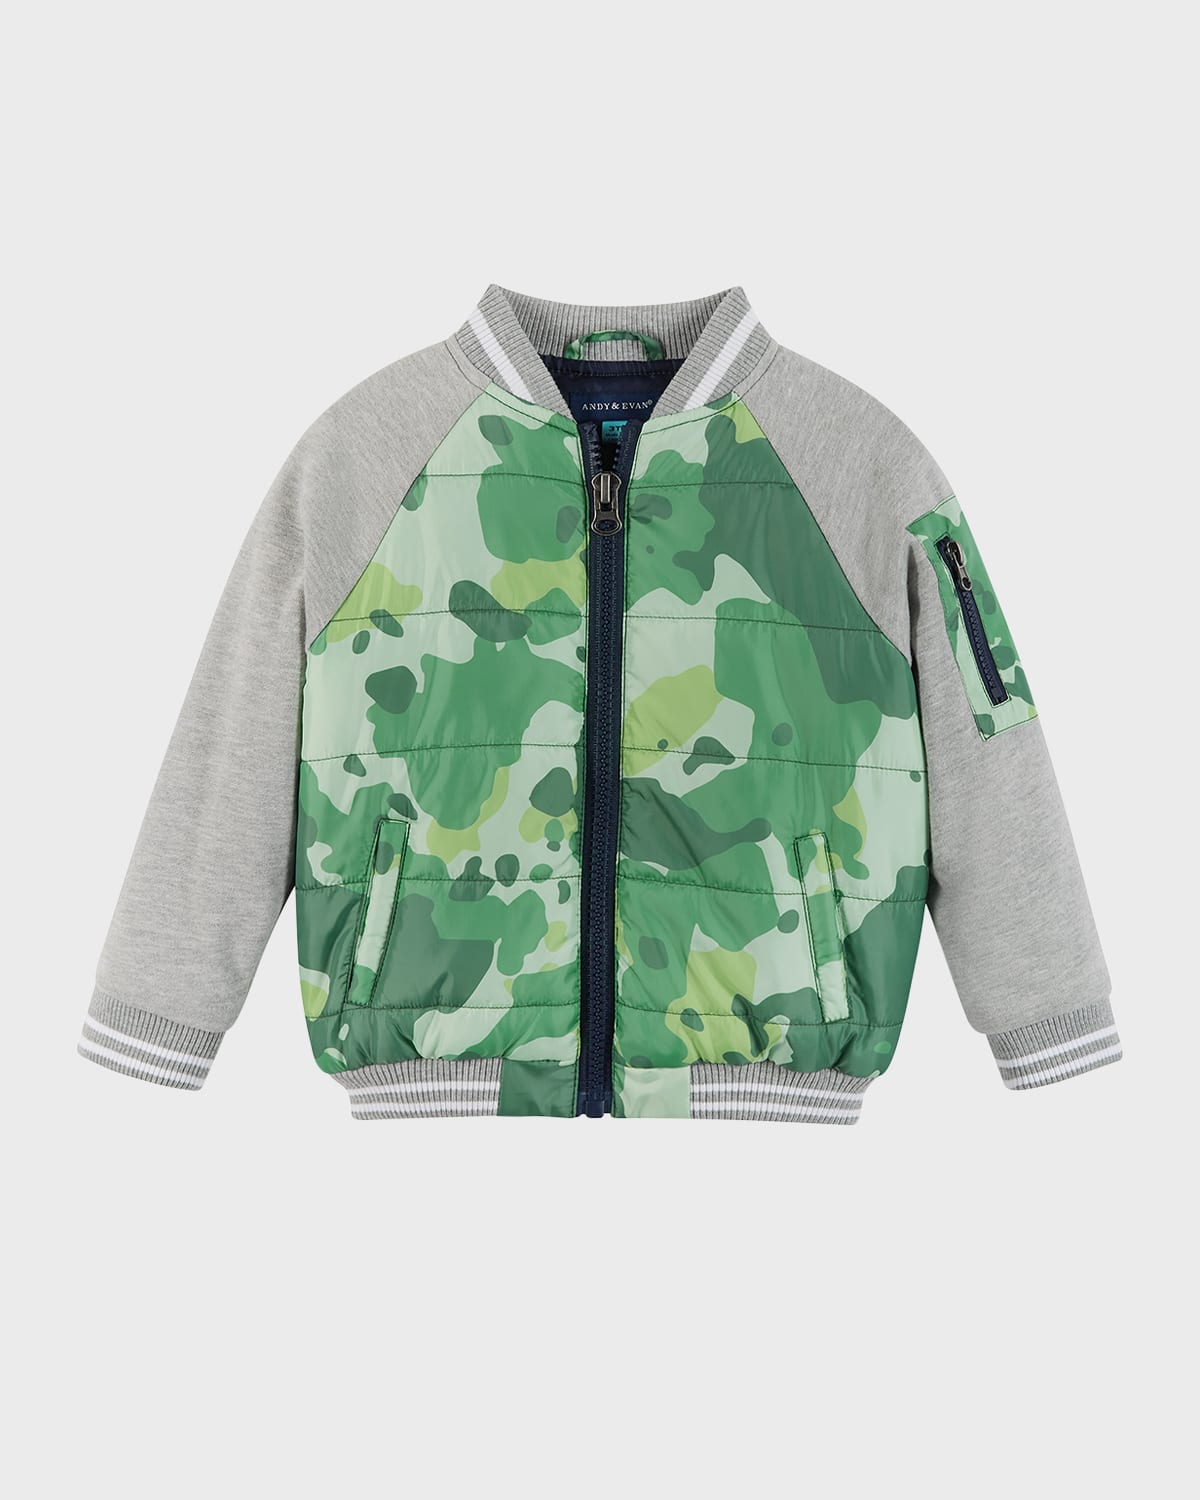 Andy & Evan Kids' Boy's Mixed Media Quilted Bomber Jacket In Camo Navy